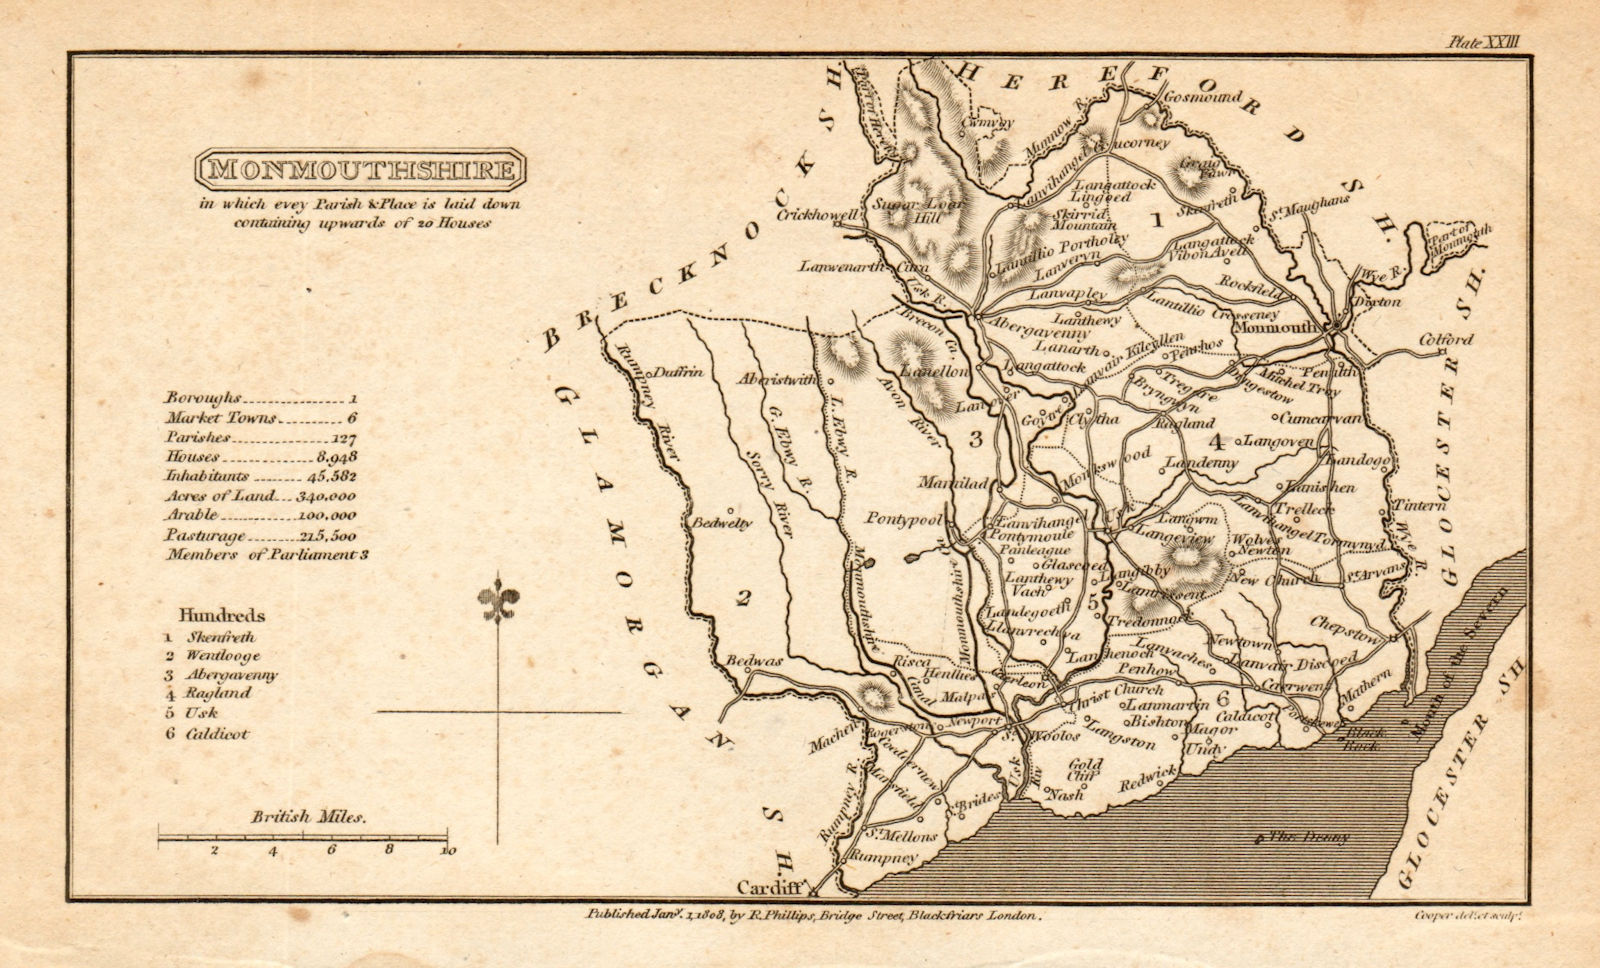 Associate Product Antique county map of MONMOUTHSHIRE by Henry Cooper for Benjamin Capper 1808